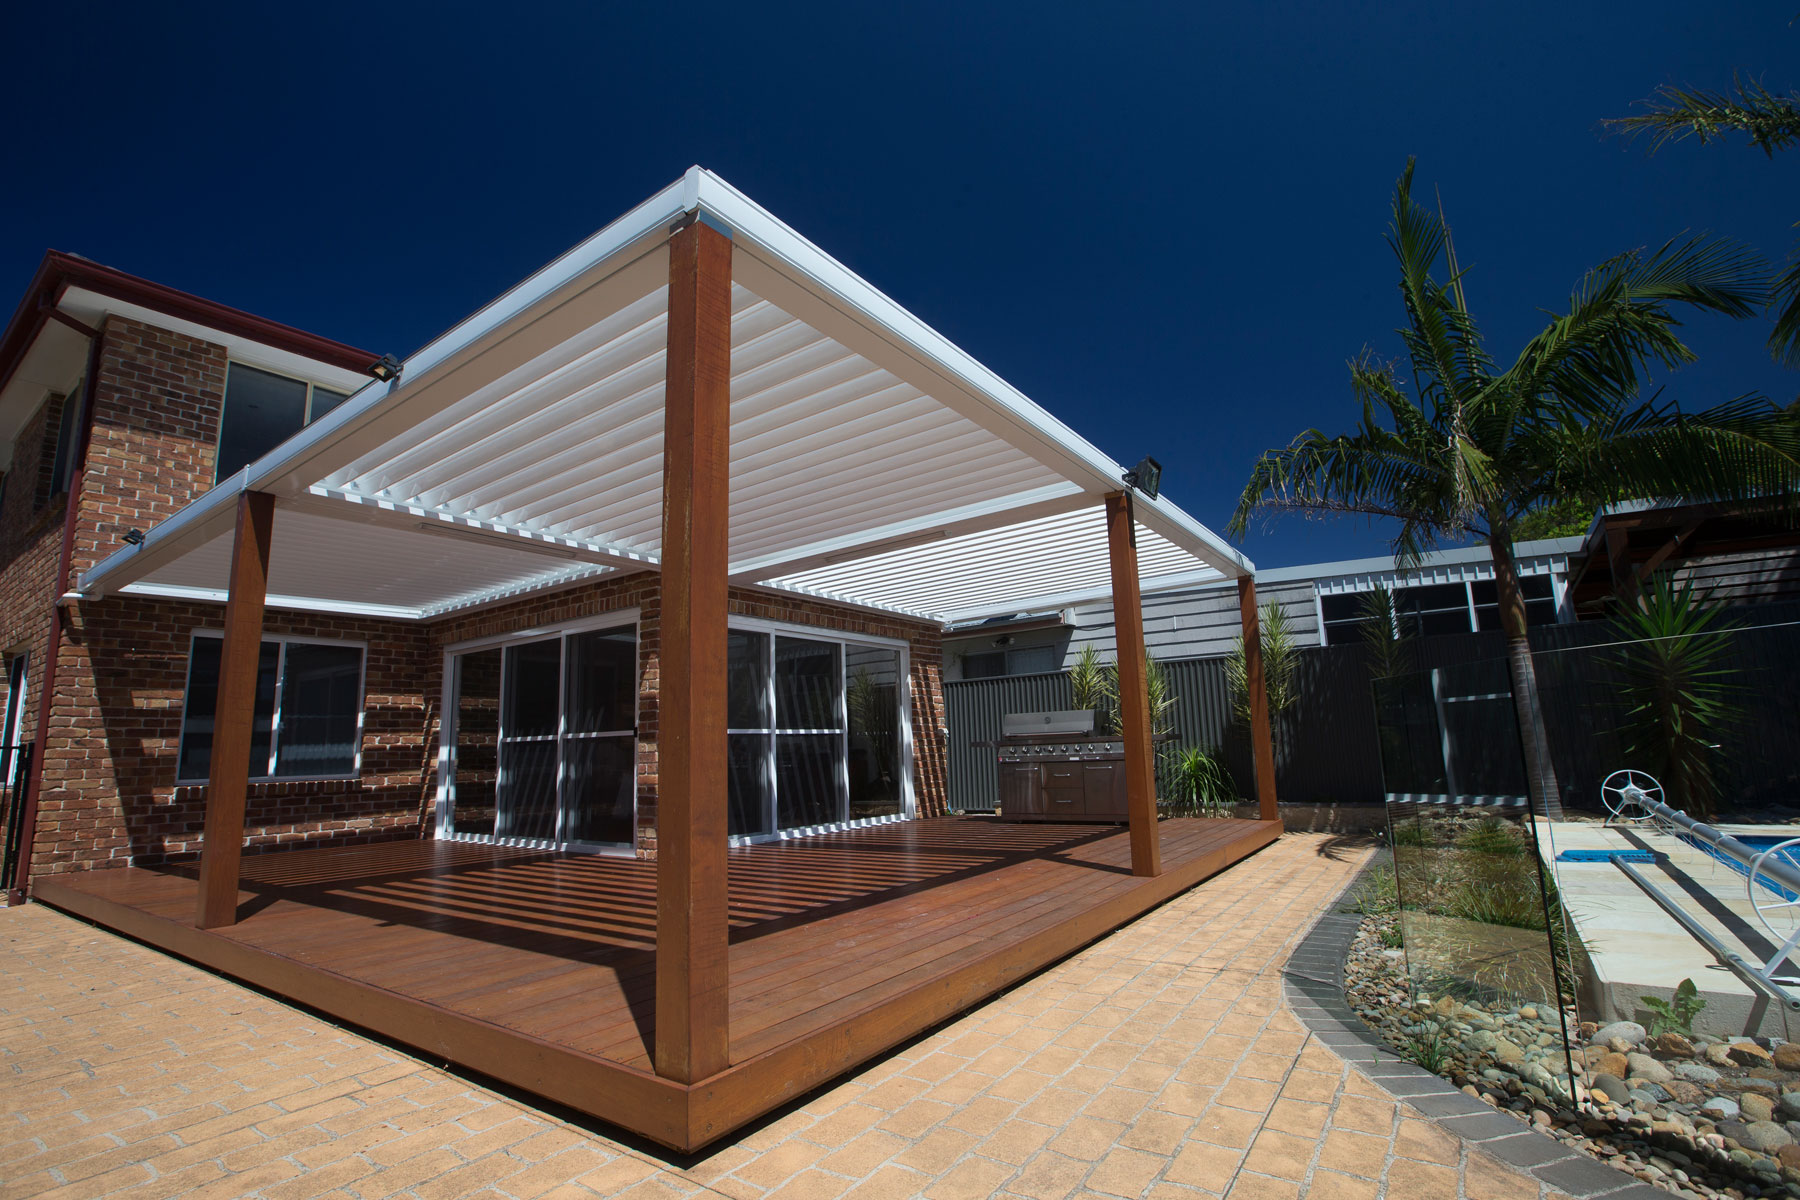 kilsyth, pergola, contact, outdoor, impressions, required, your, call, listen, ability, best, listen, means, need, information, further, Outback Sunroof Louvre